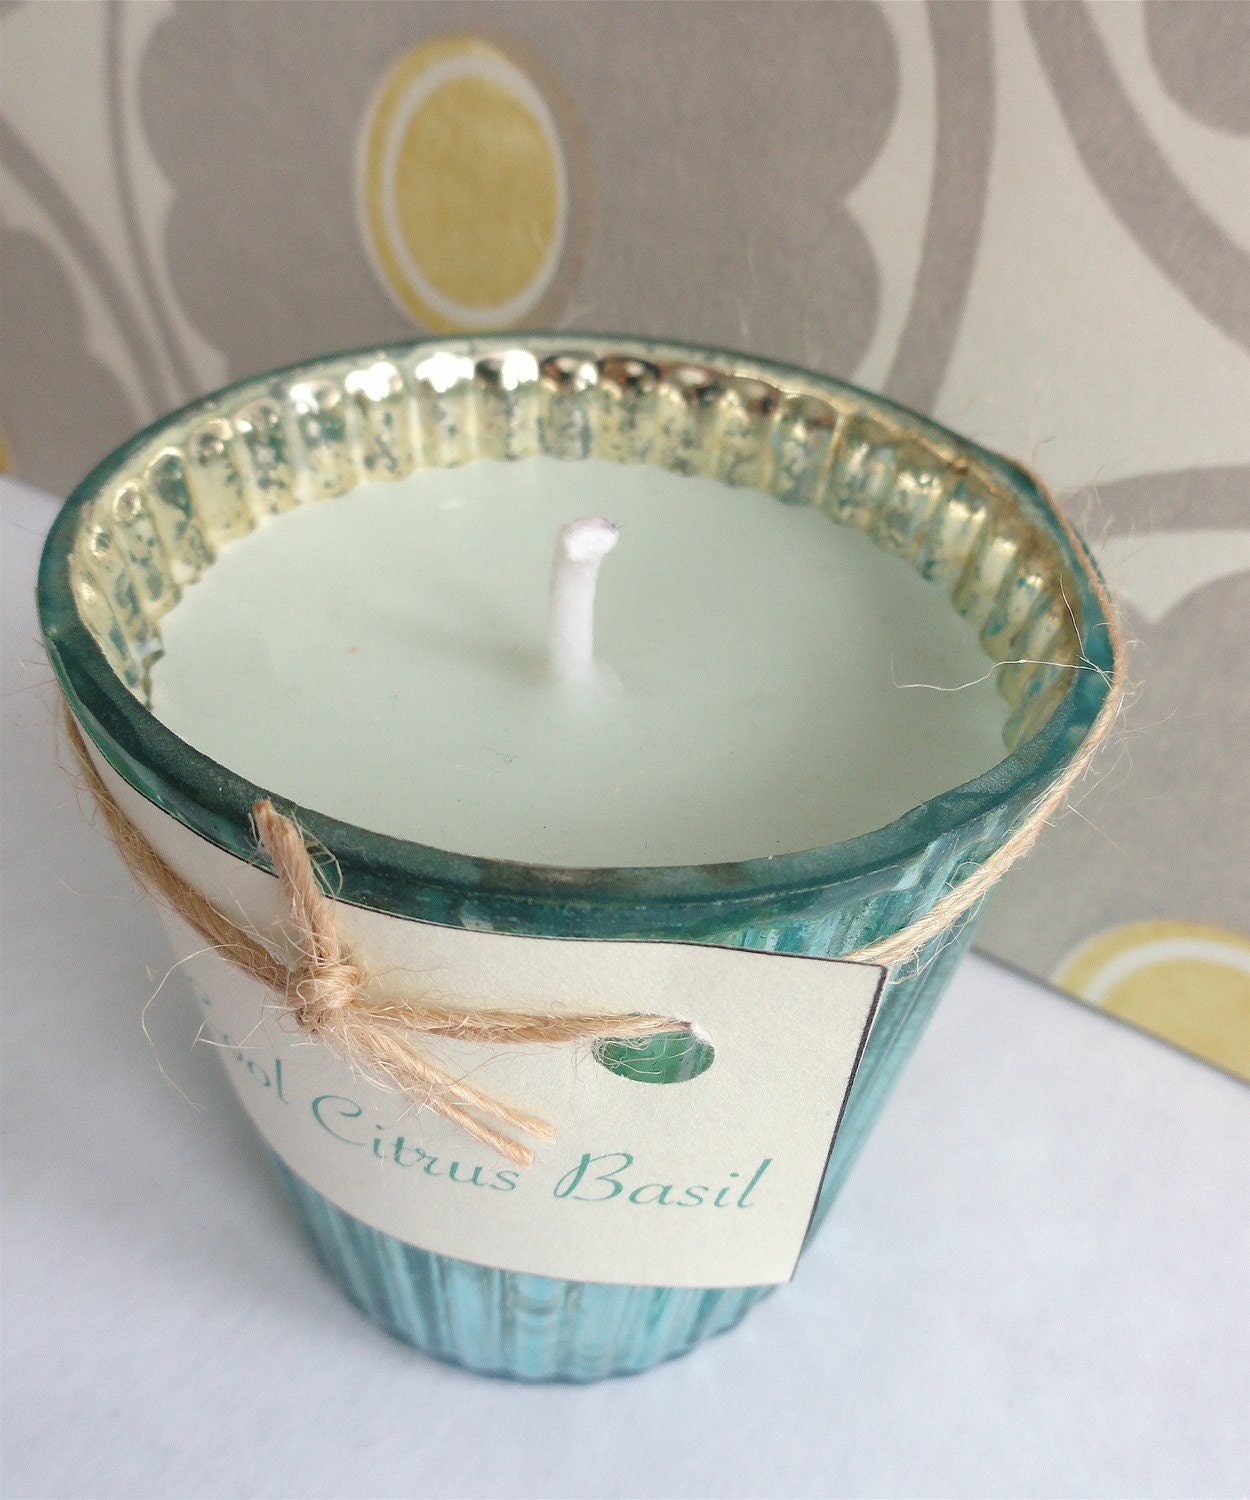 COOL CITRUS BASIL Handcrafted Soy Candle Recycled (6 oz.)